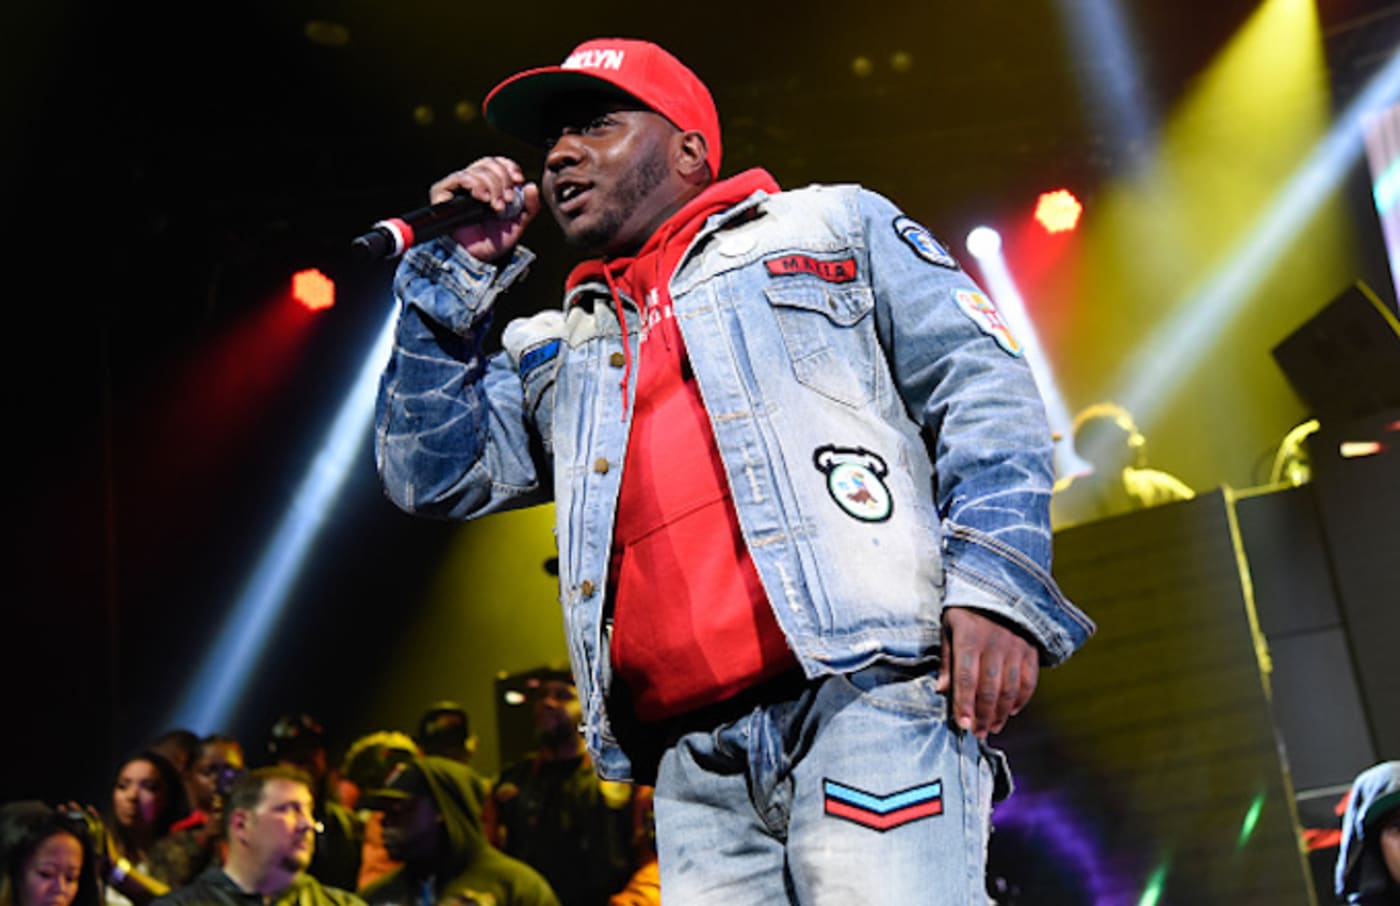 Lil' Cease performs live on stage for the Ruff Ryder's Reunion Tour 2017